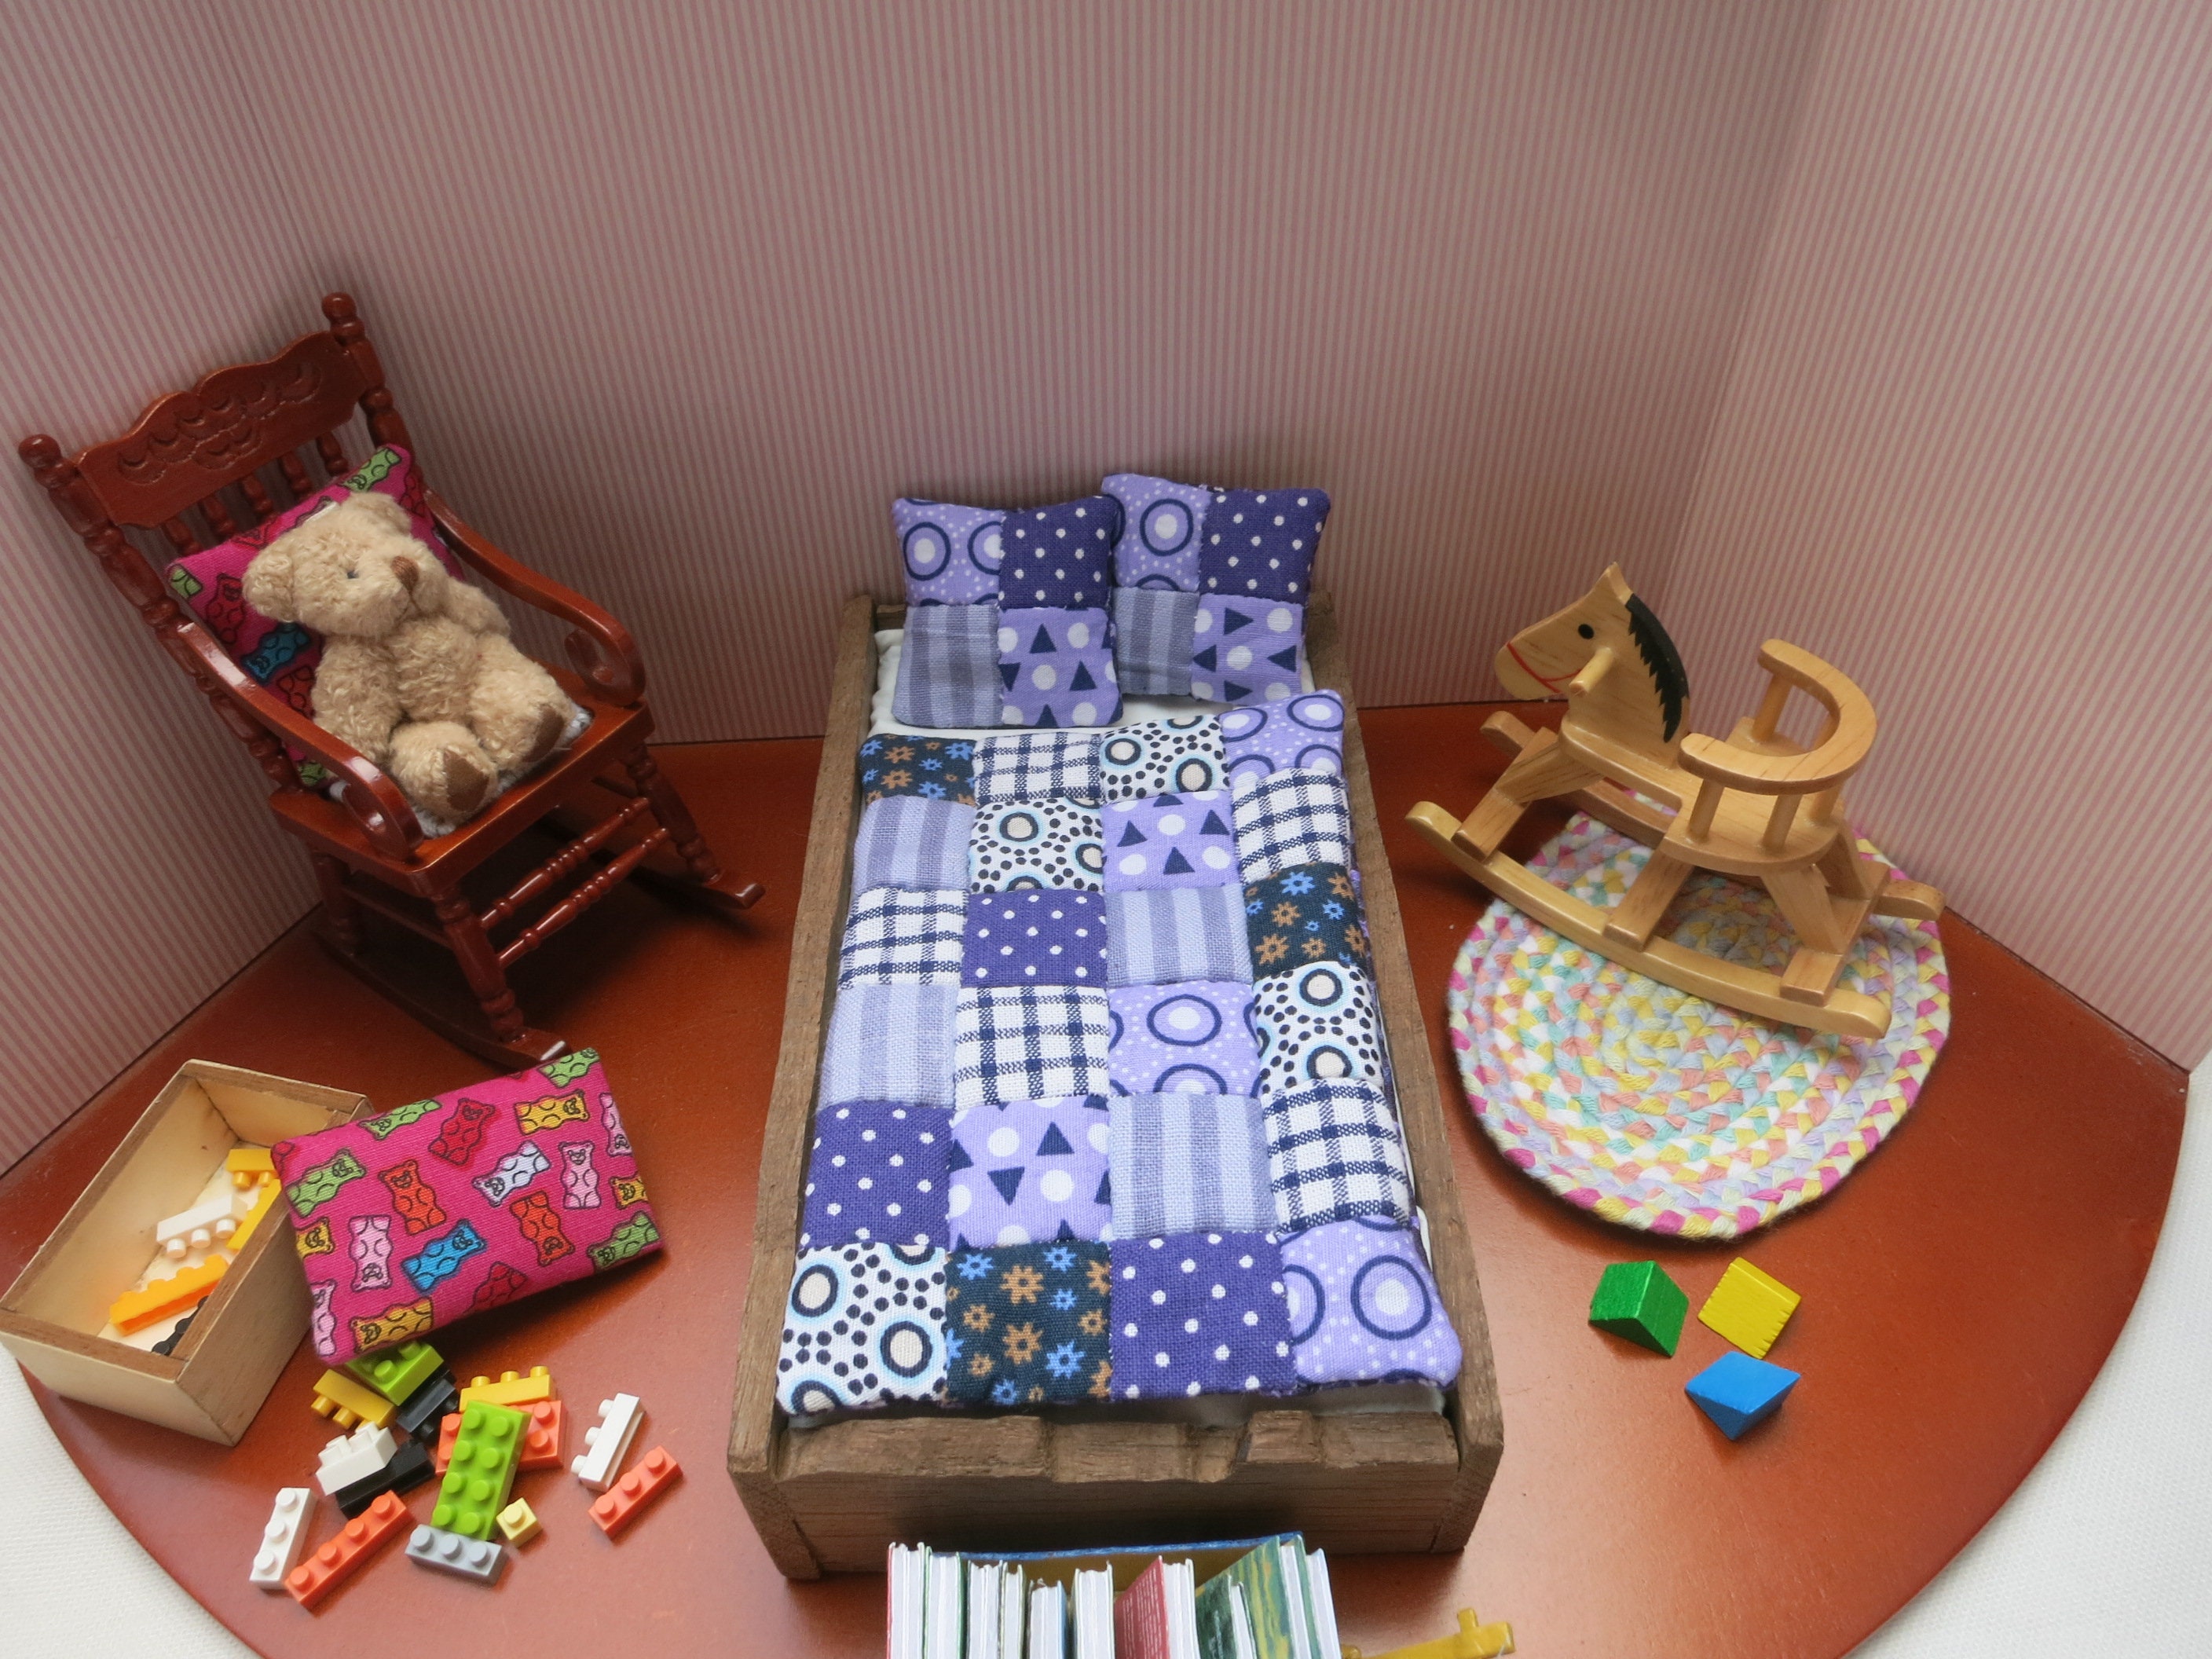 Hand-sewn patchwork blanket with two pillows for a doll's house 1:12